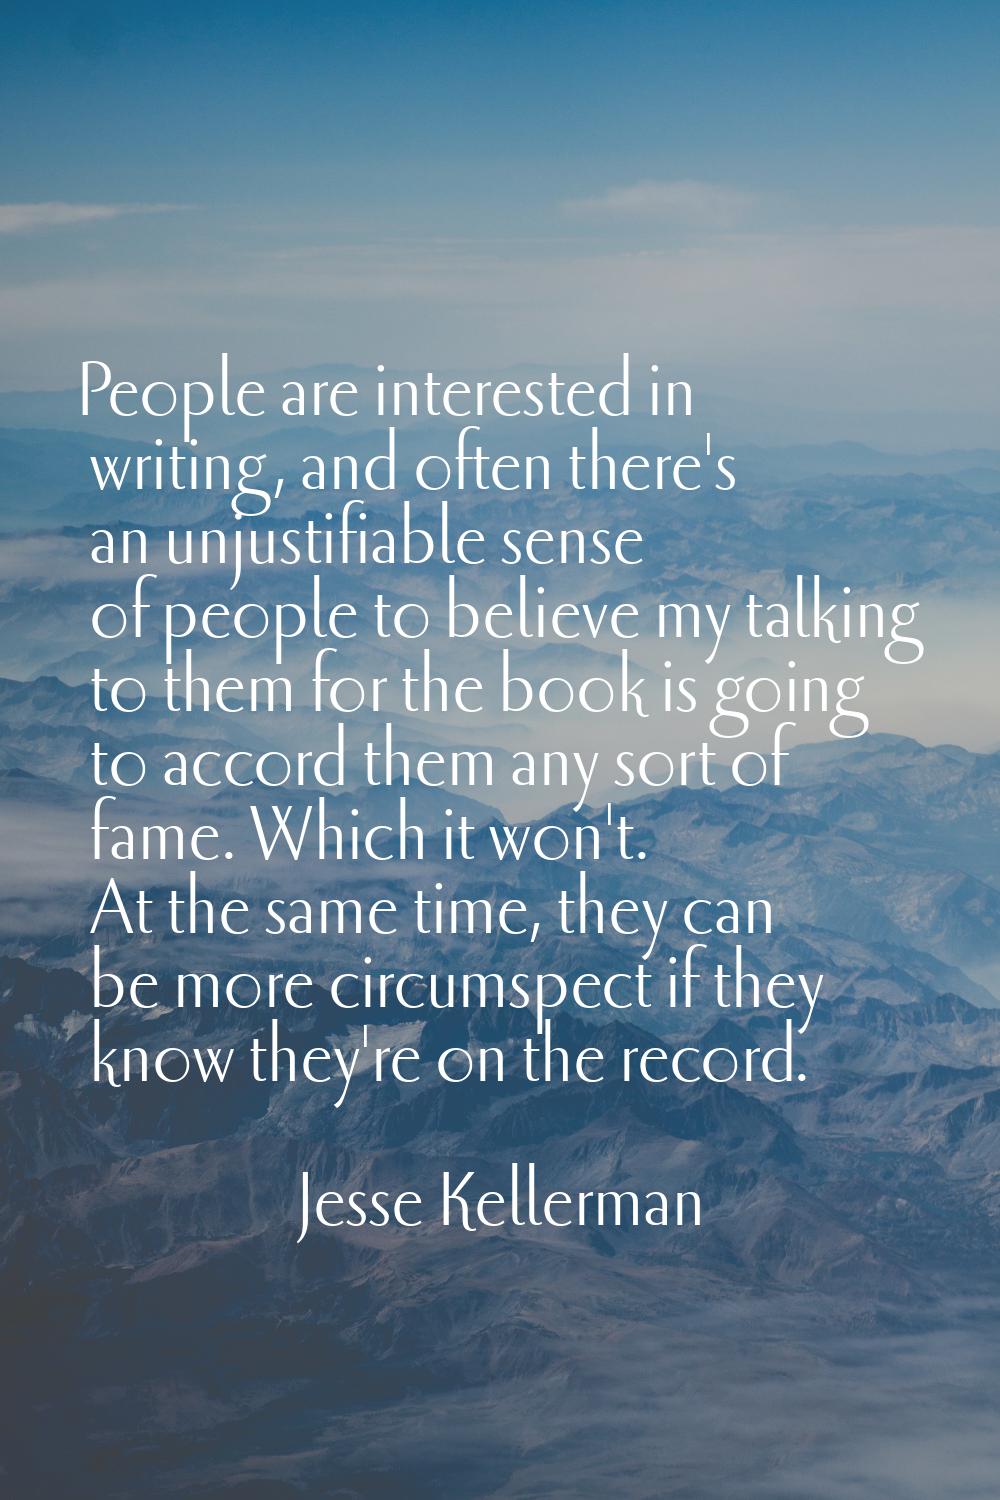 People are interested in writing, and often there's an unjustifiable sense of people to believe my 